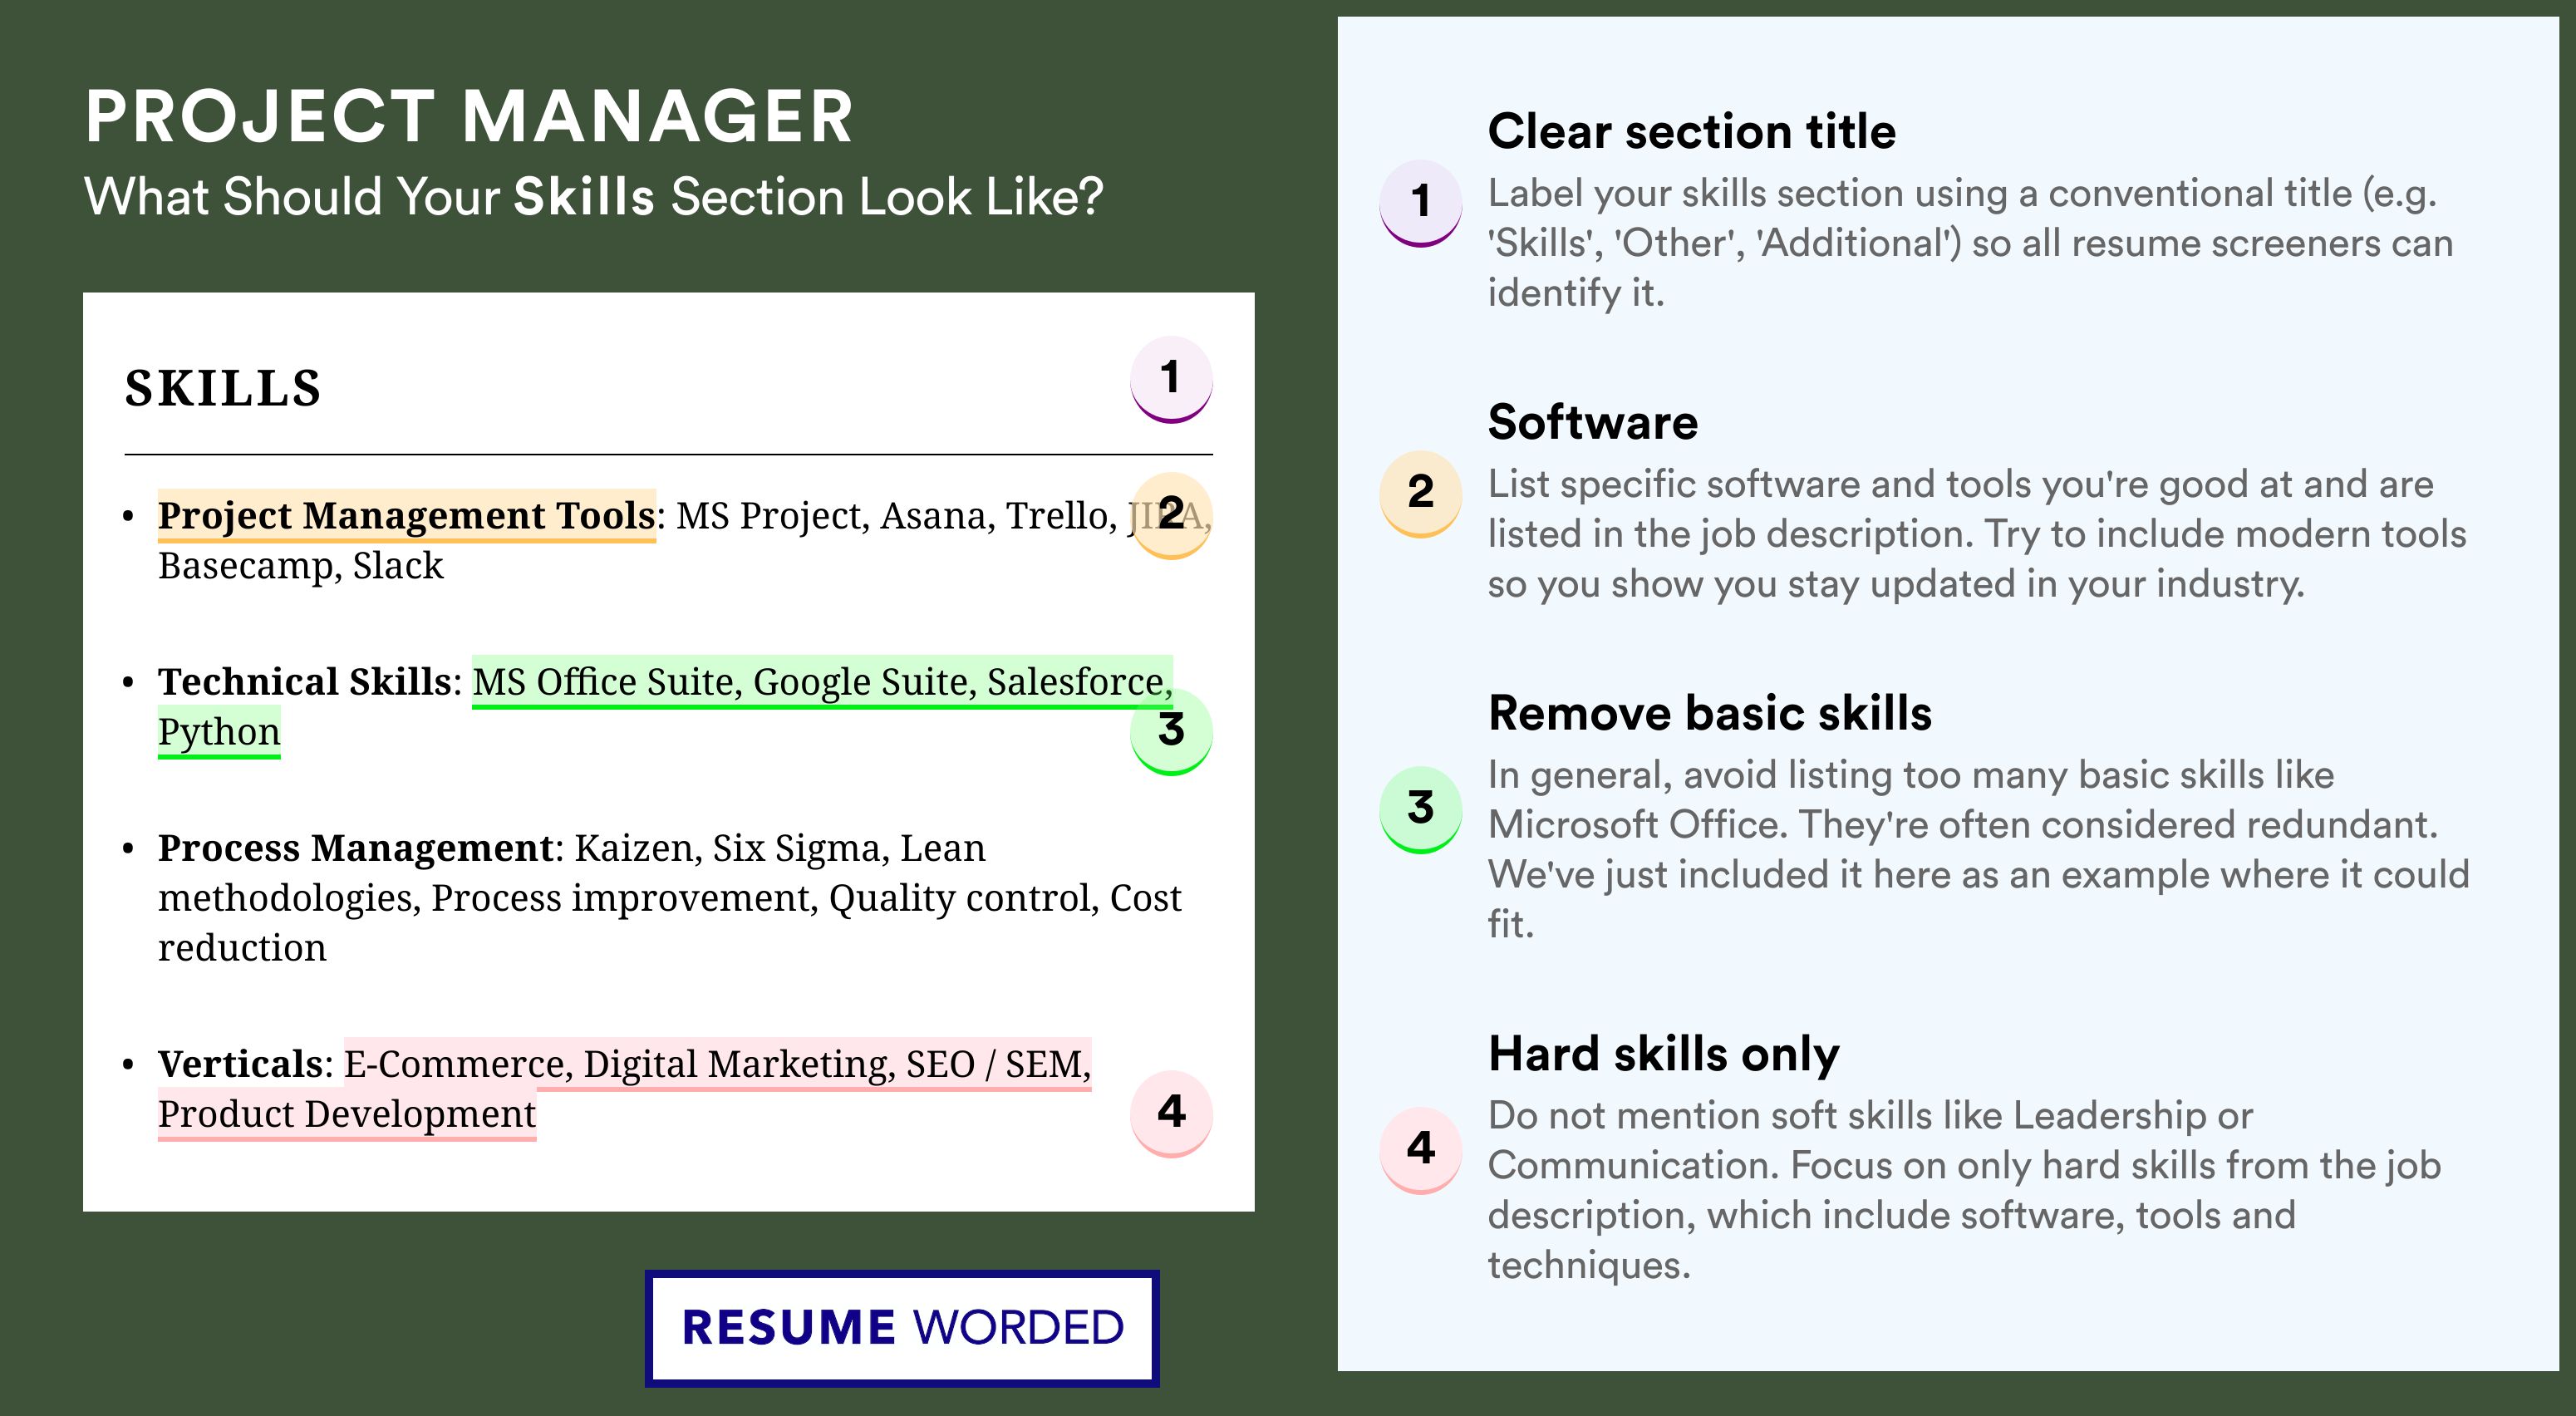 How To Write Your Skills Section - Project Manager Roles